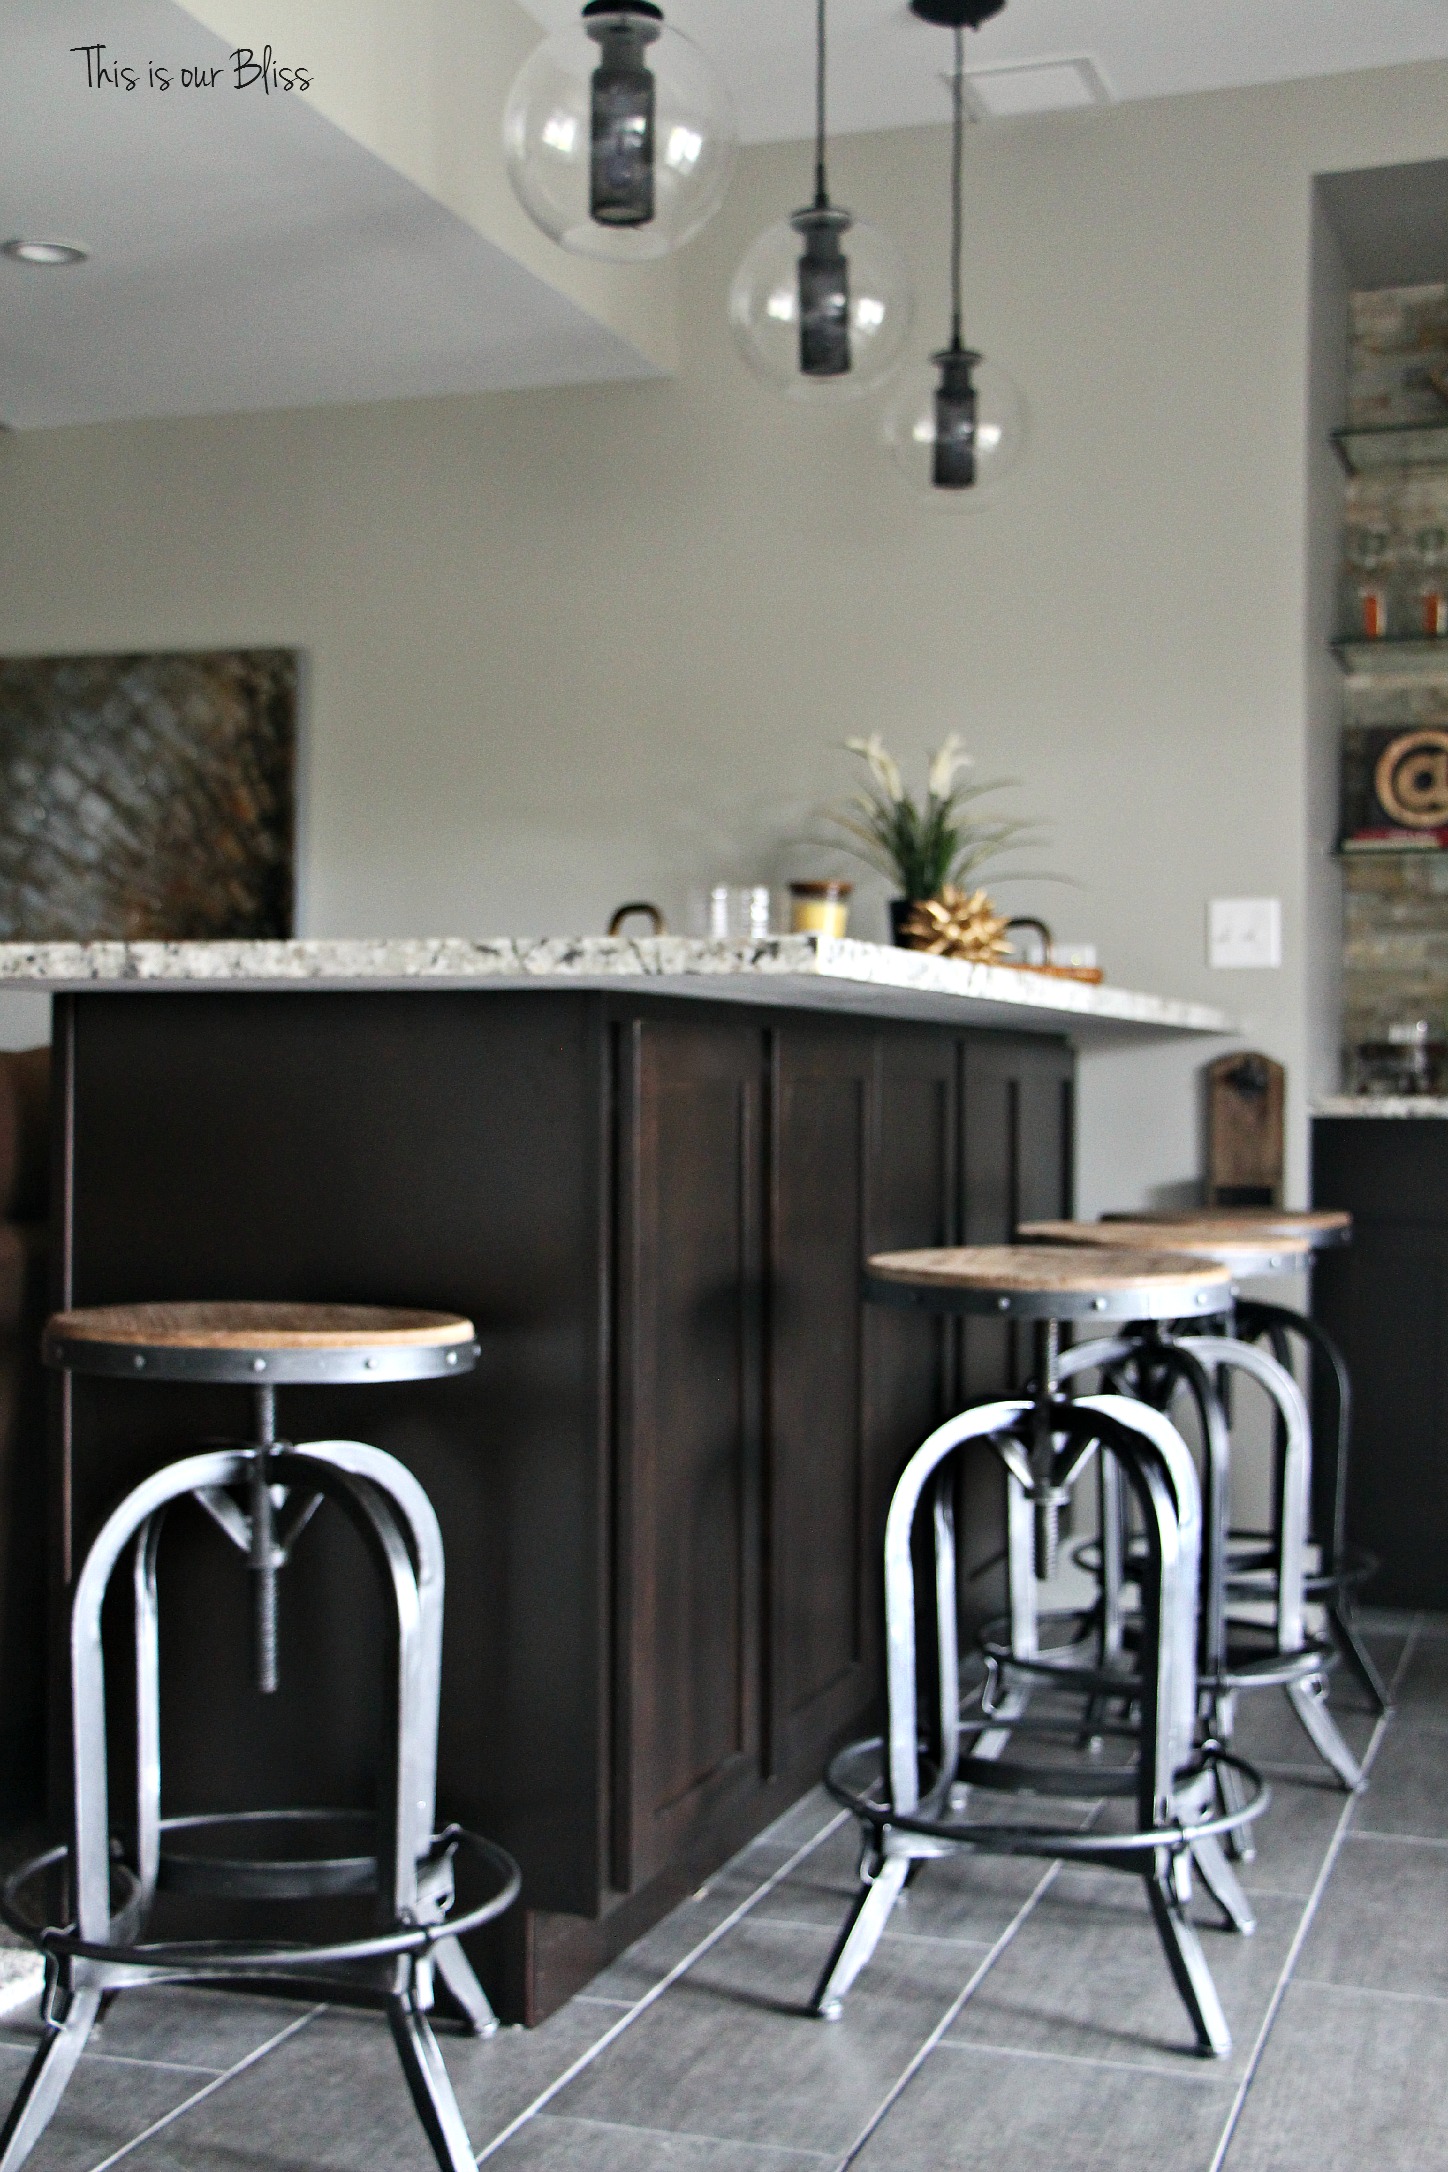 Basement bar industrial barstools modern industrial lights neutral decor baement project progress 1 This is our Bliss